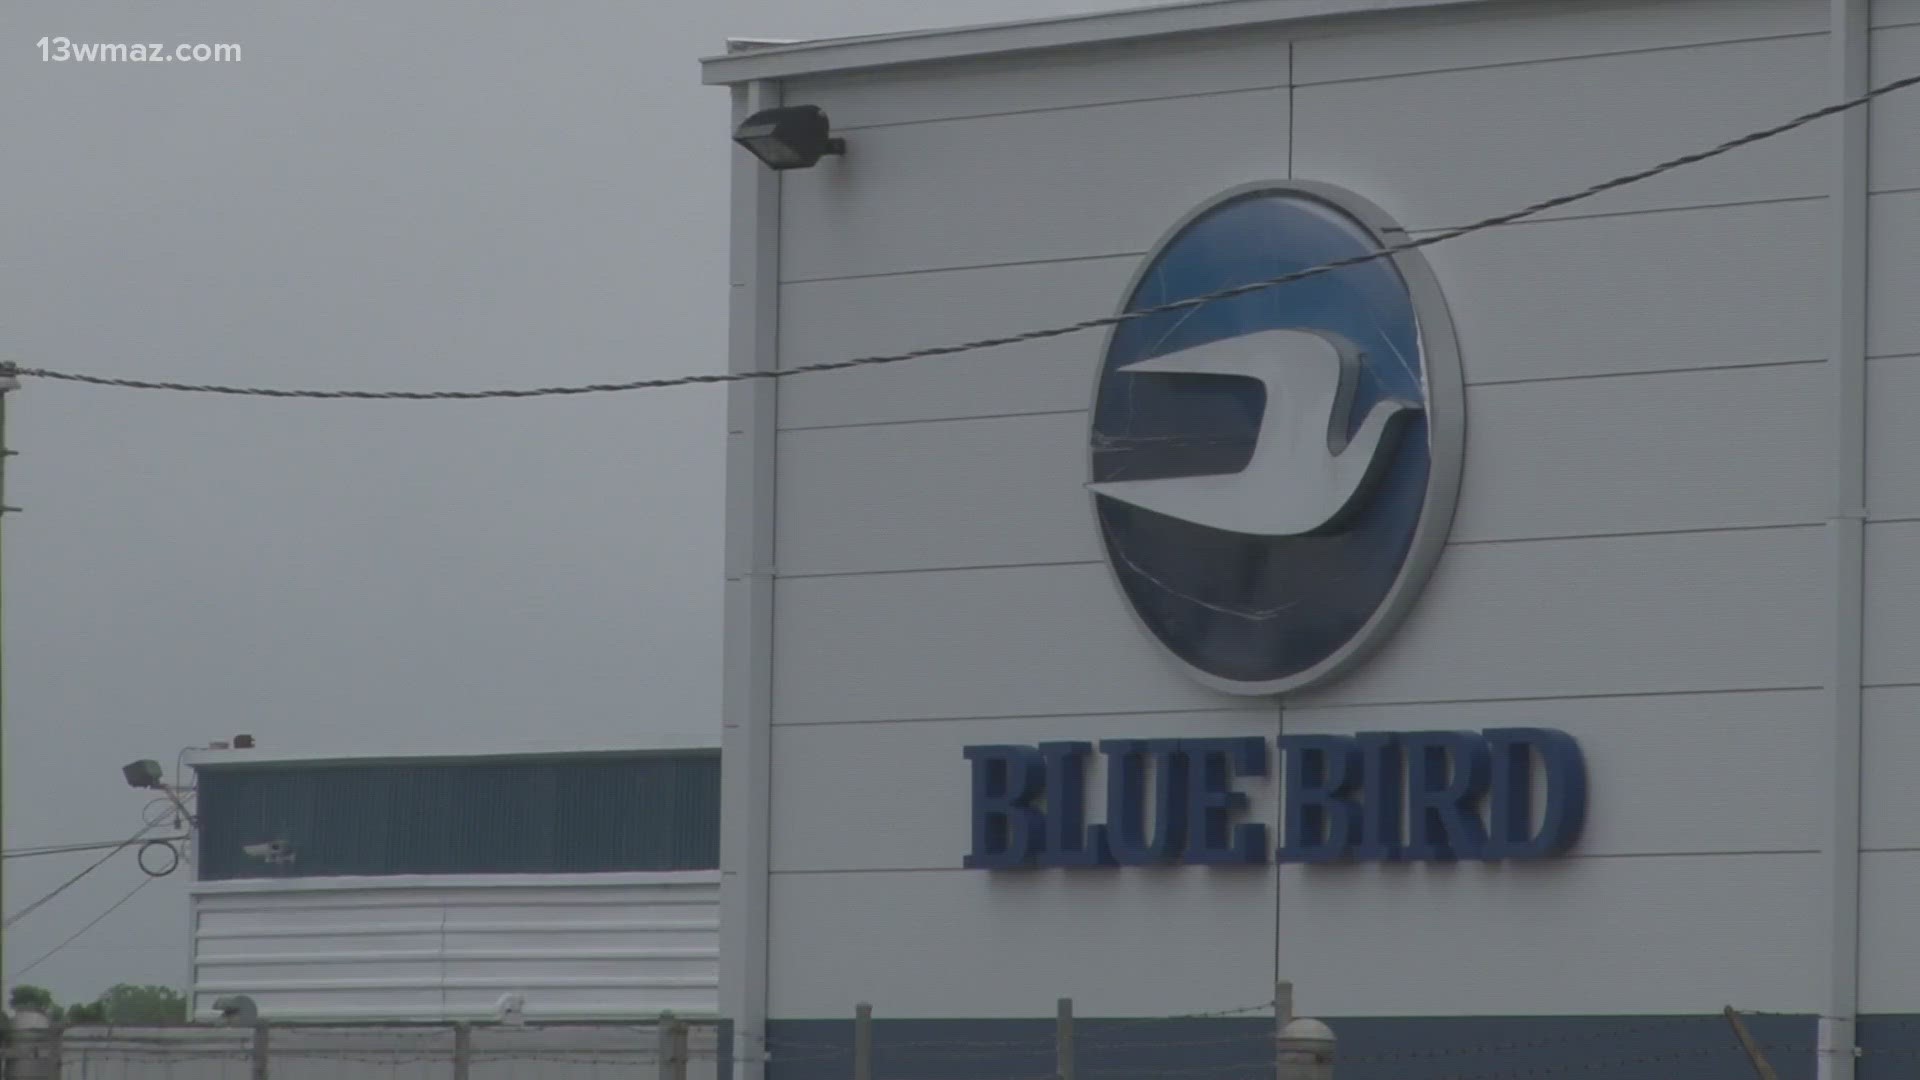 Workers say they've been trying to unionize for the last 18 months due to working conditions at Blue Bird, a school bus manufacturing company in Fort Valley.